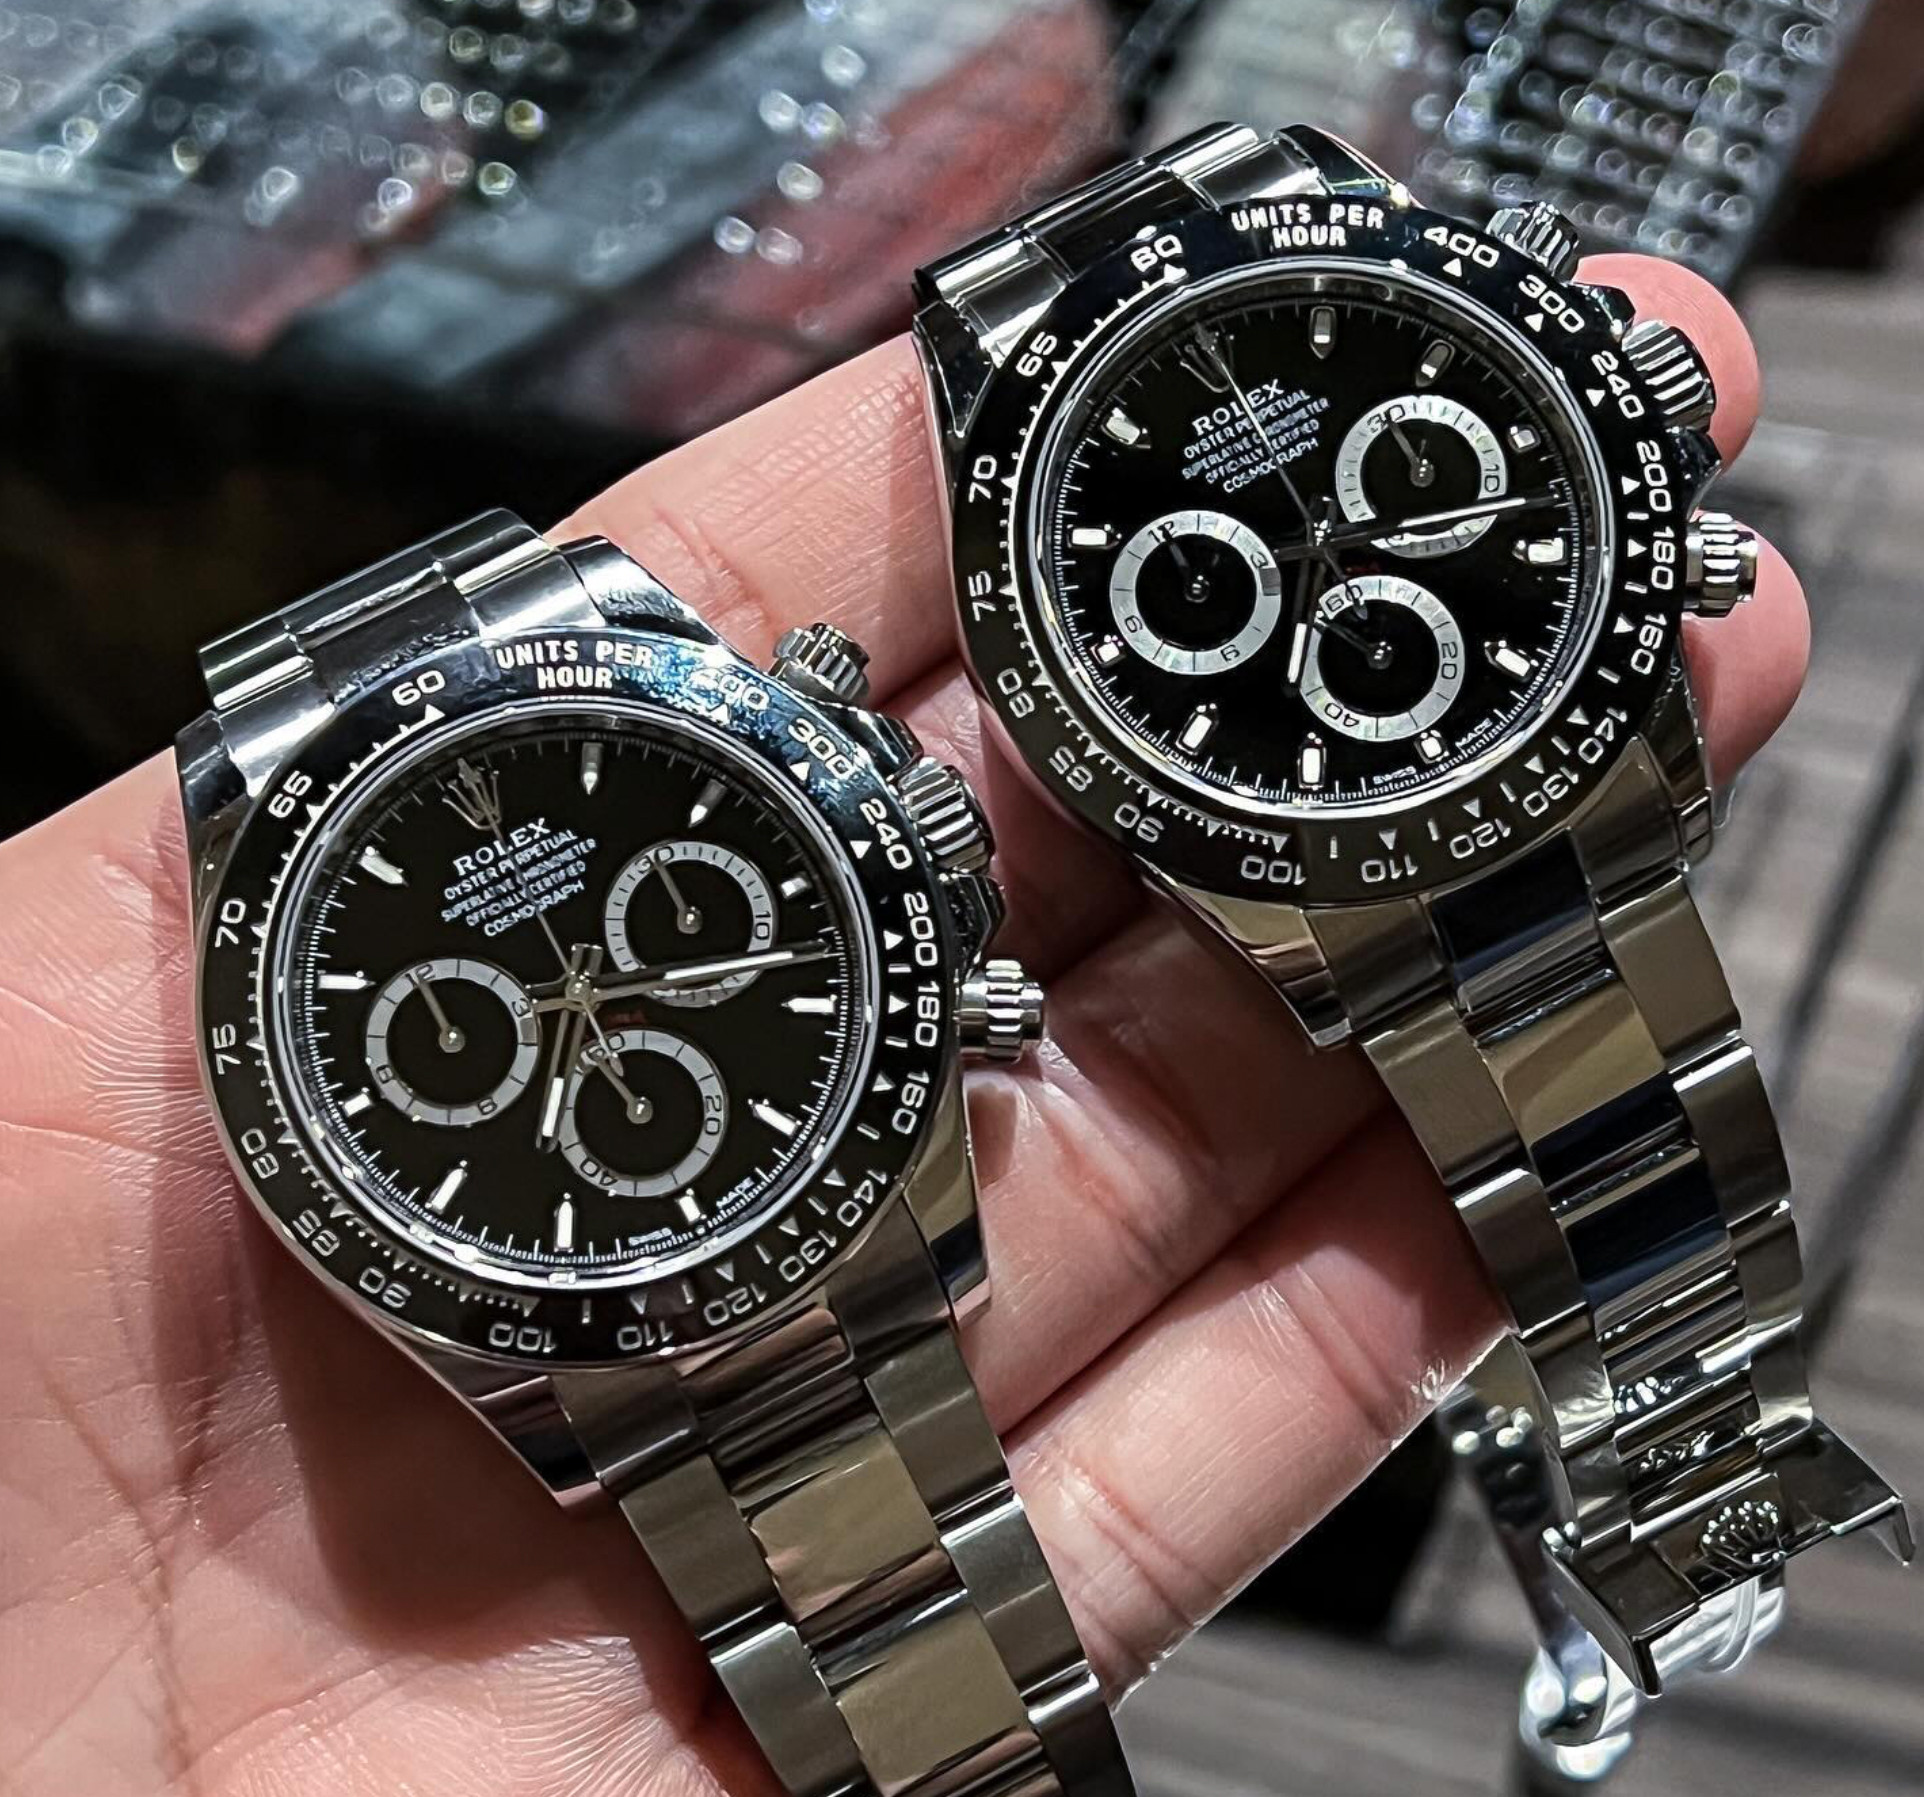 Complete SS Daytona Comparison - 116520, 116500, and the New 